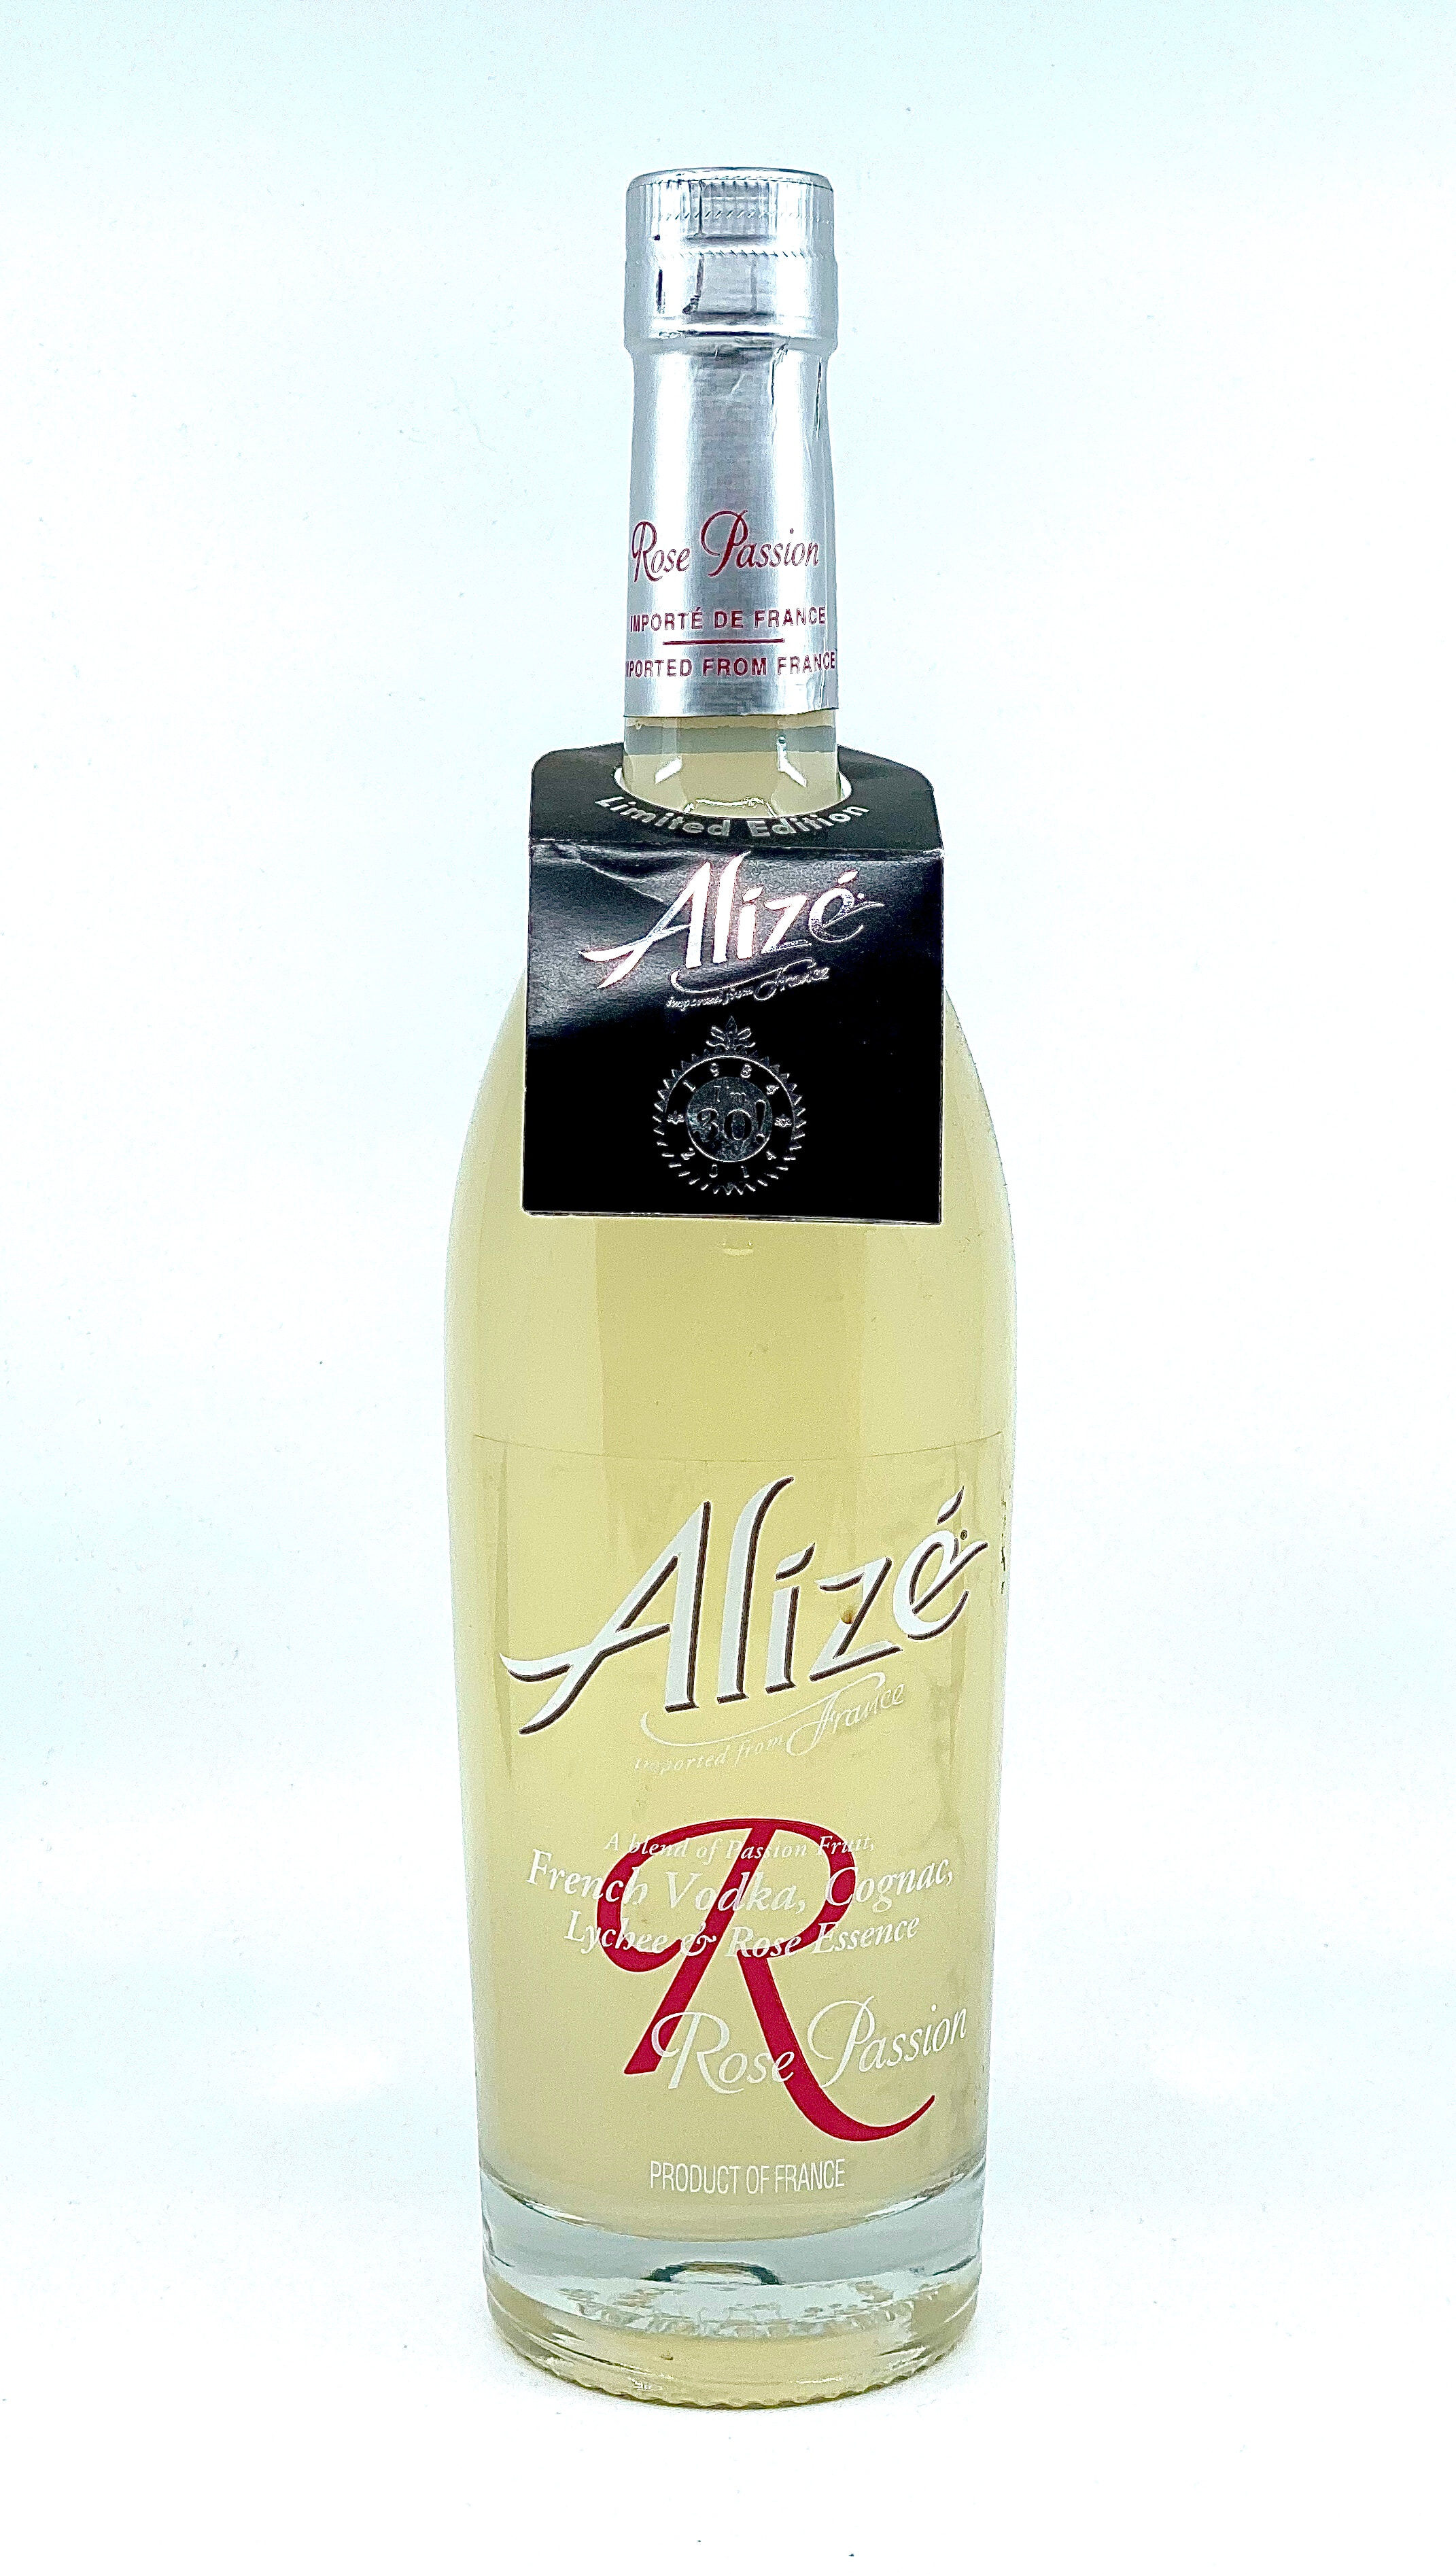 Alize French Vodka, Cognac, Lychee and Rose Essence